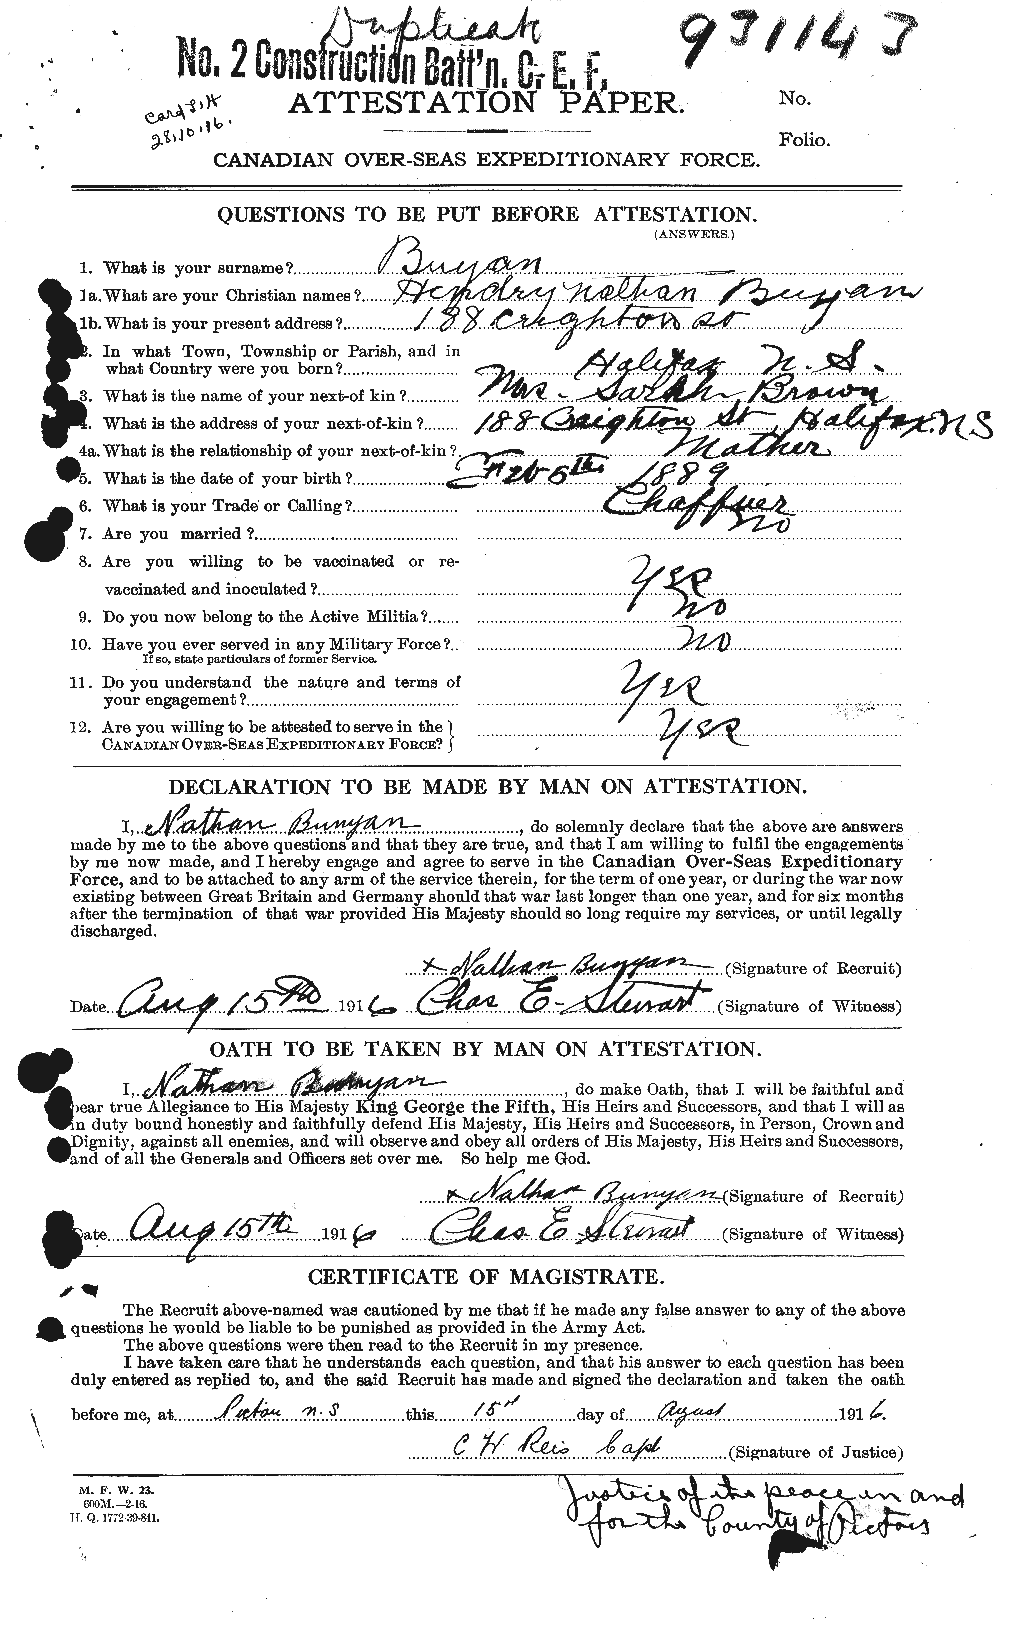 Personnel Records of the First World War - CEF 270989a